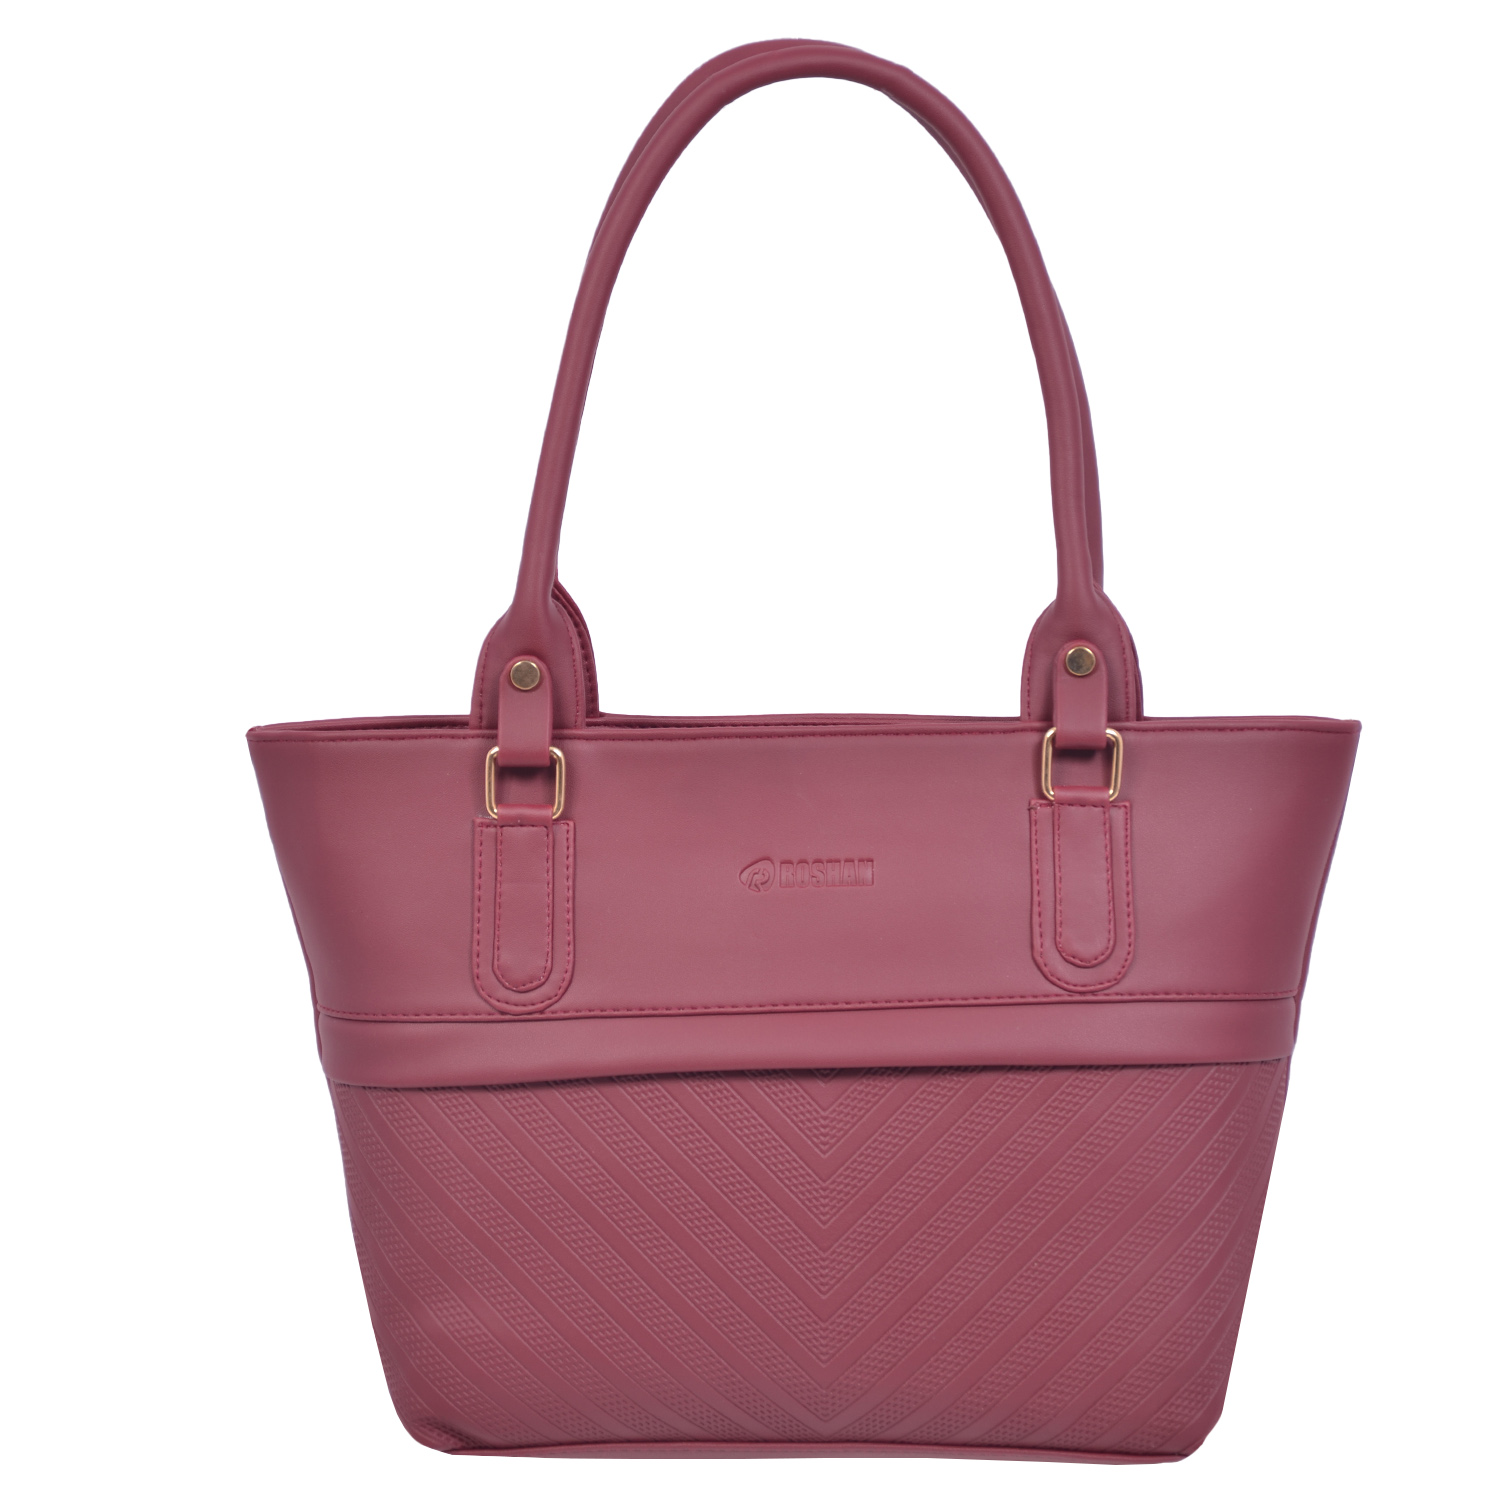 Roshanbags-ProductName